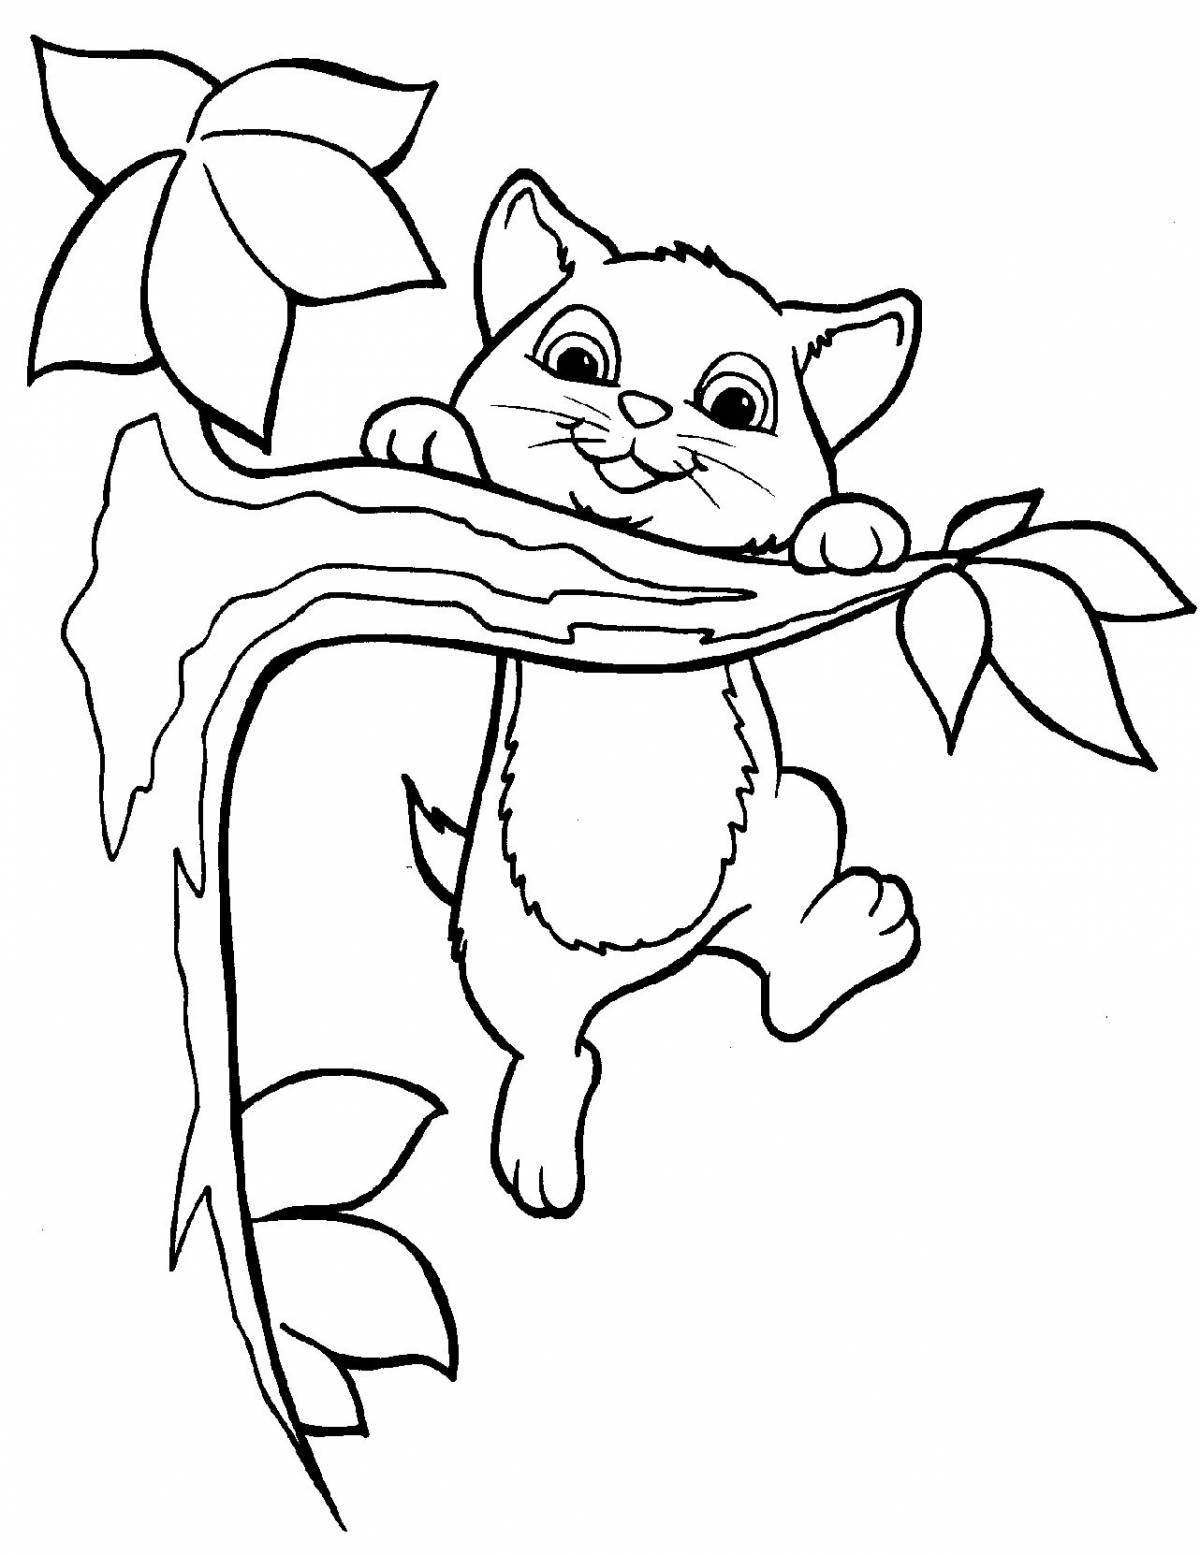 Coloring page dazzling kitten